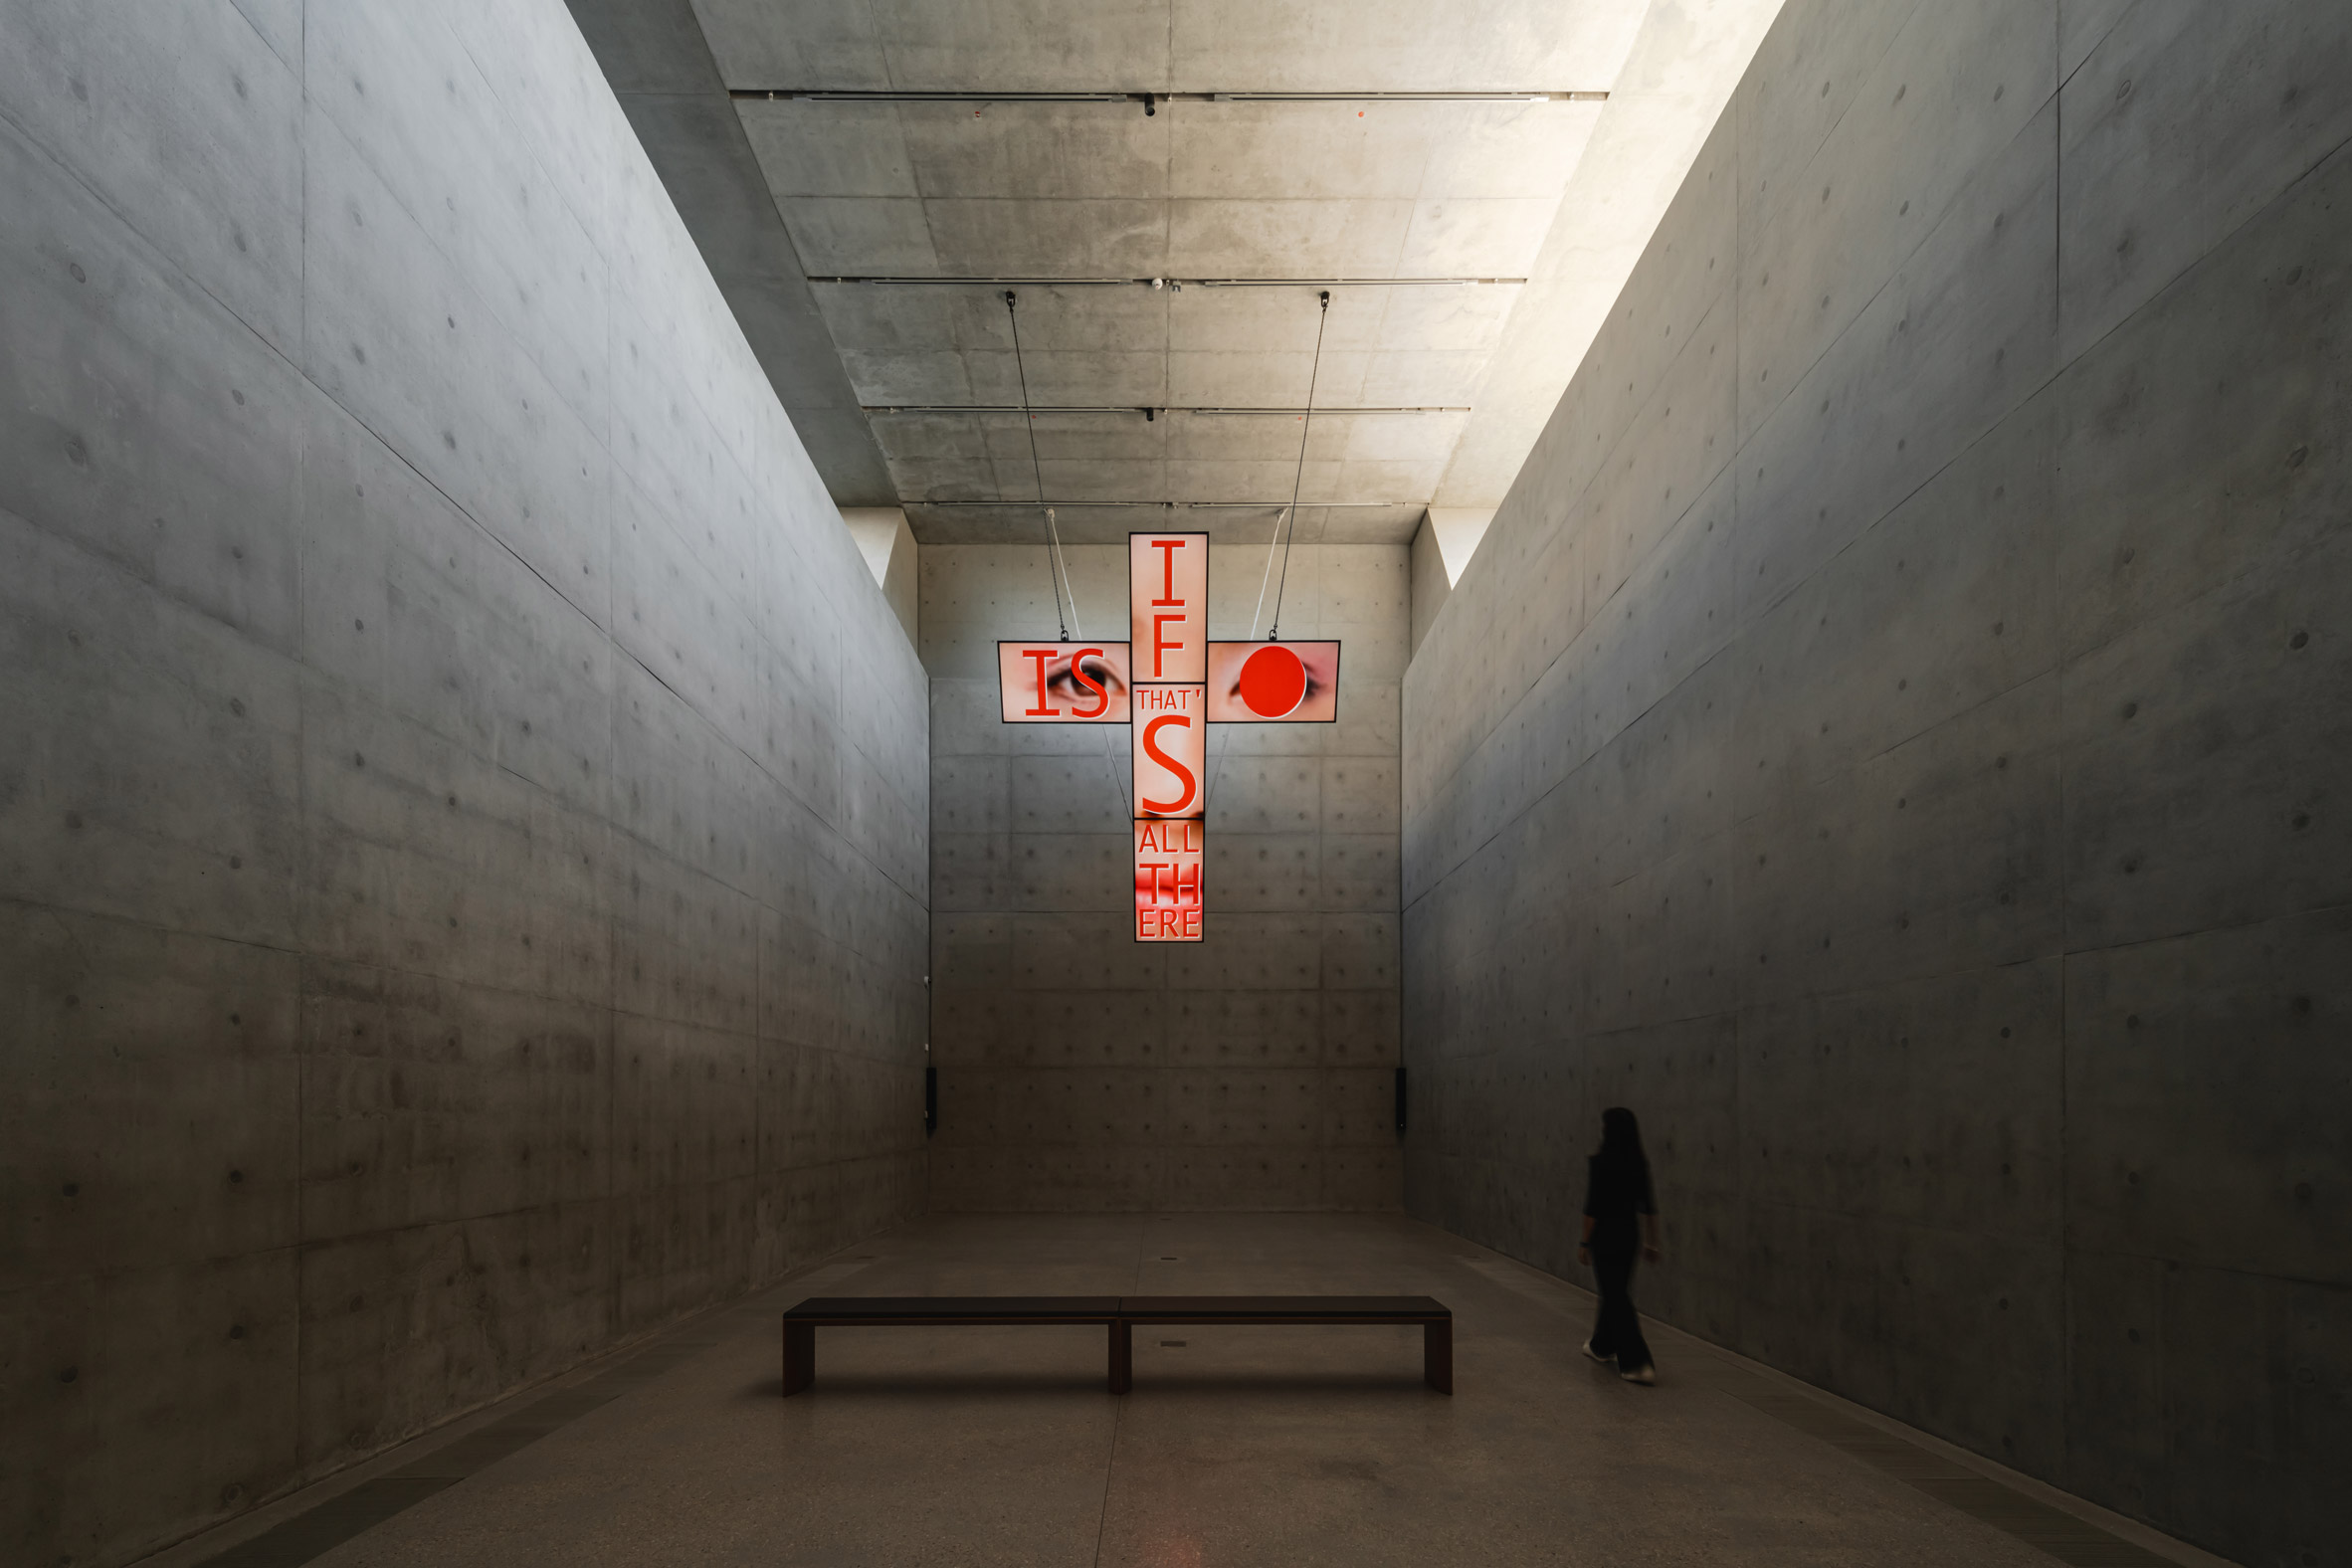 Illuminated cross-shaped artwork hangs high up in an all-concrete gallery space